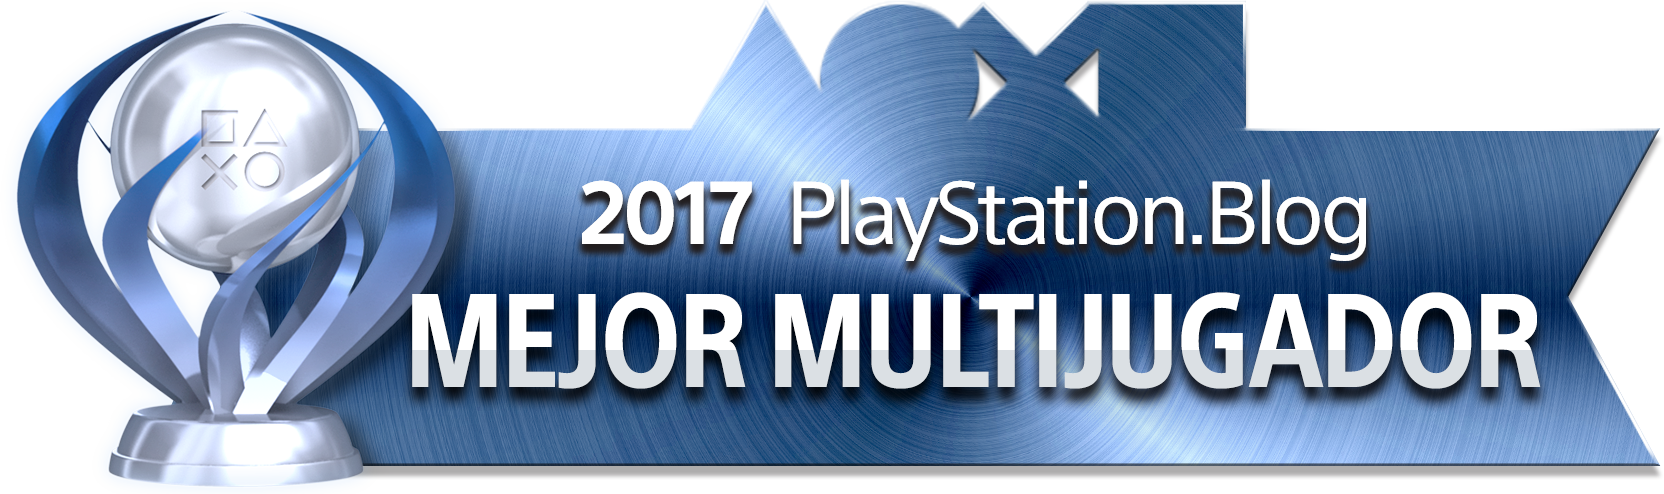 PlayStation Blog Game of the Year 2017 - Best Multiplayer (Platinum)